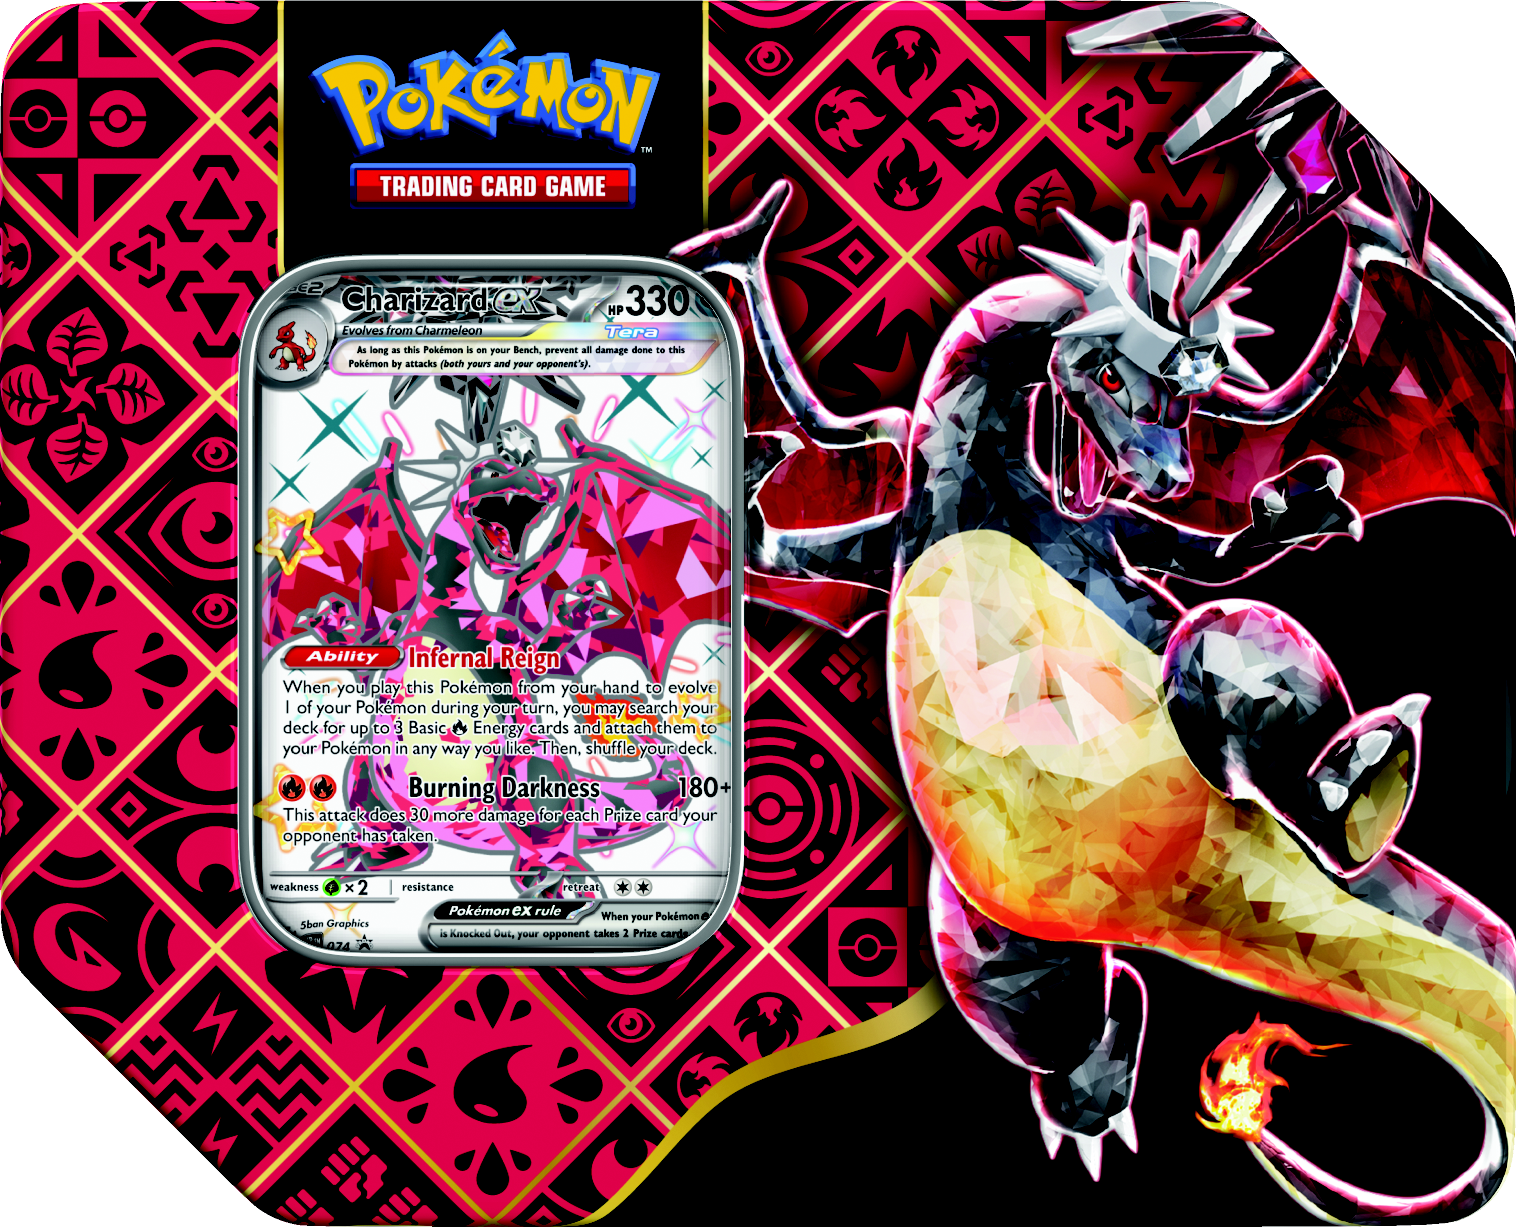 The Pokemon TCG Adds Over 100 New Shinies In Paldean Fates